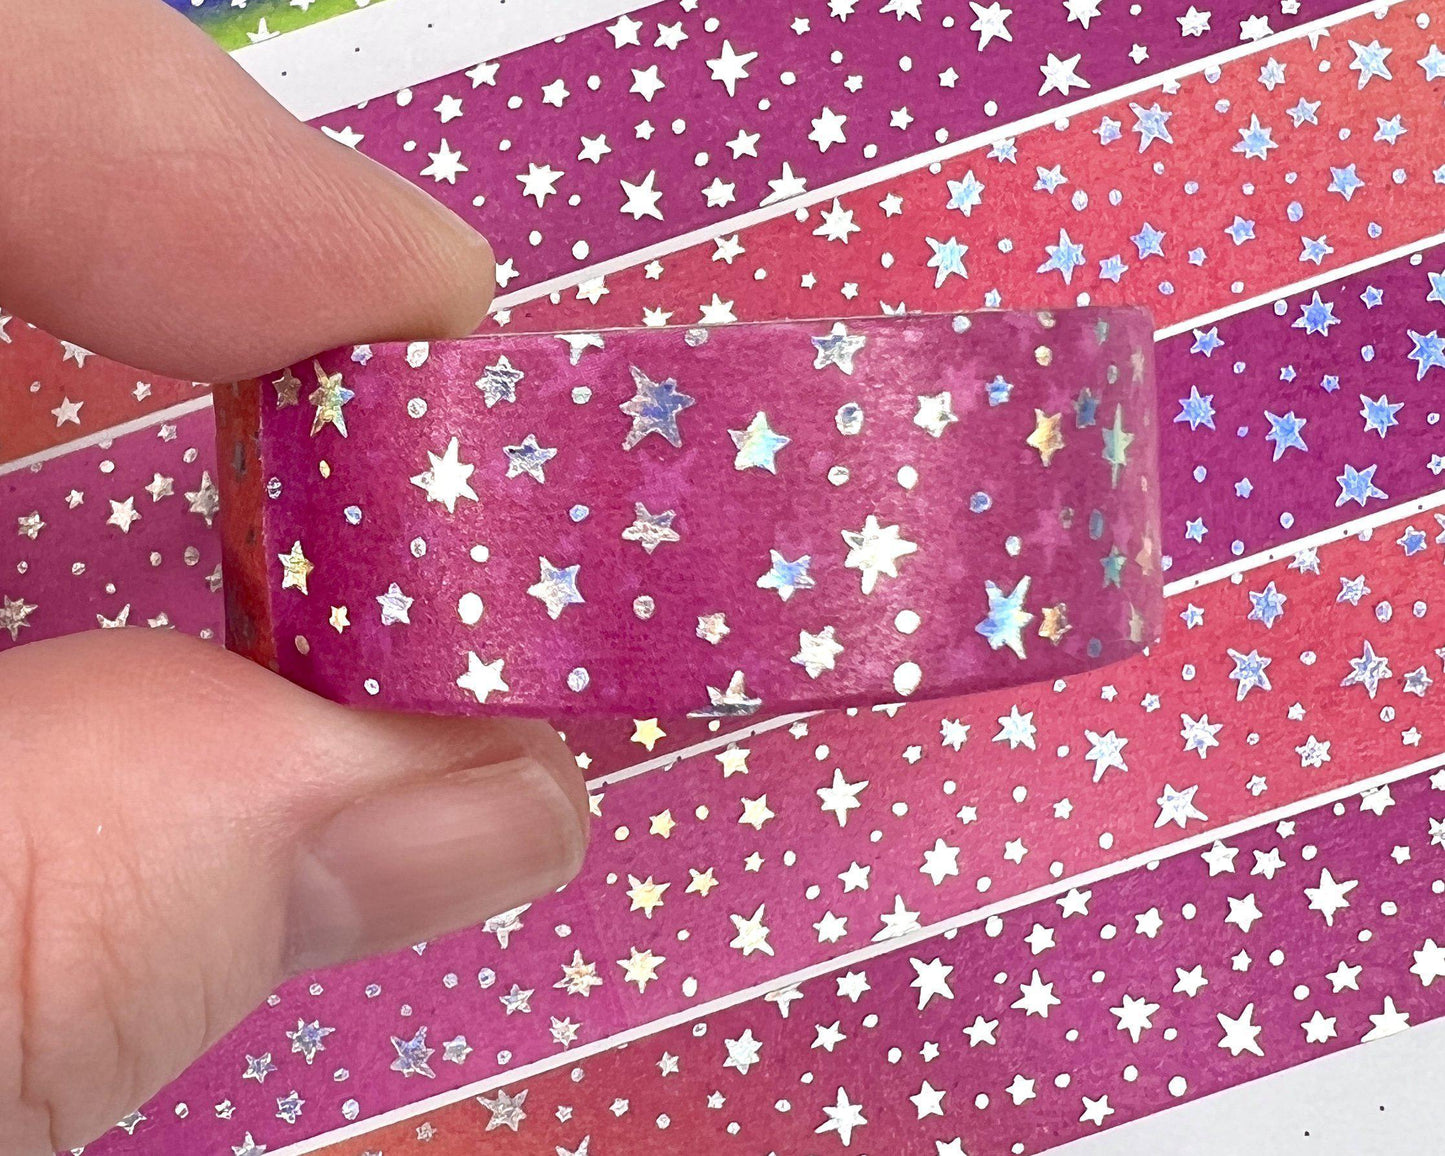 Holographic Foiled Star Burst Washi Tape - Peach Sangria-Cricket Paper Co.